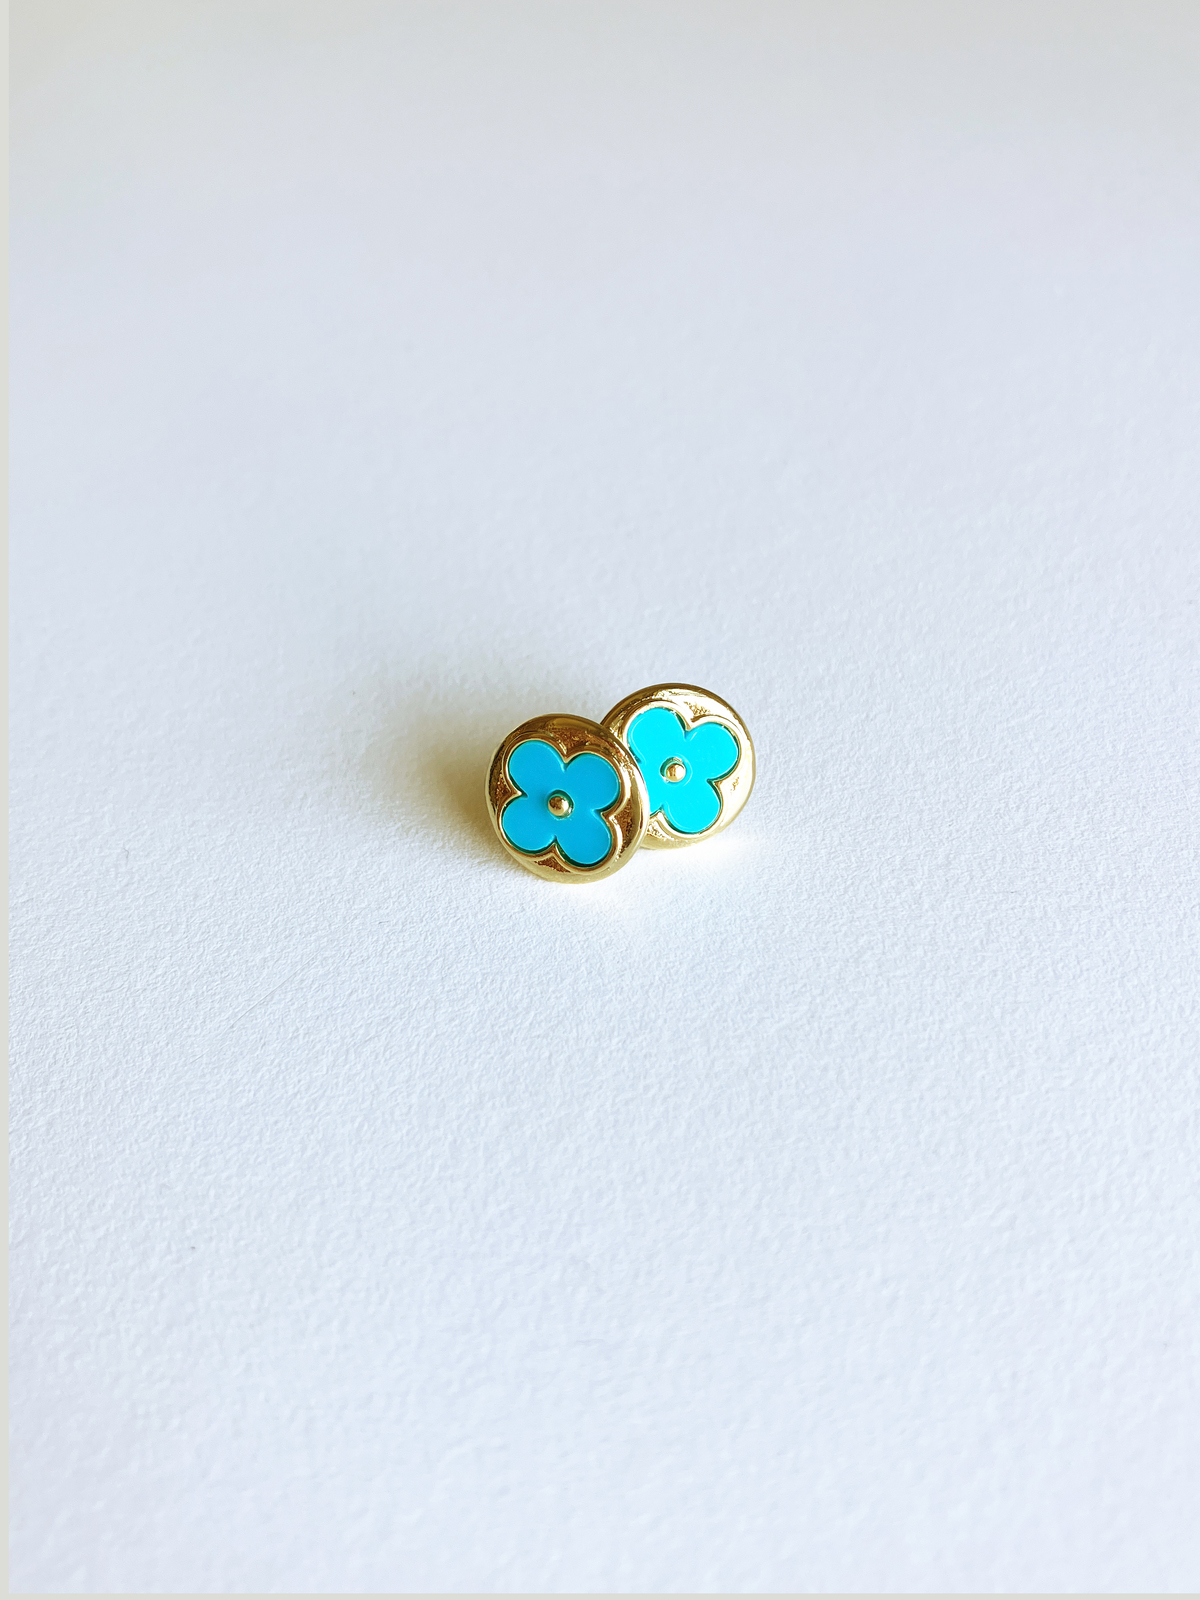 Primary image for Turquoise Moonflower Earrings 